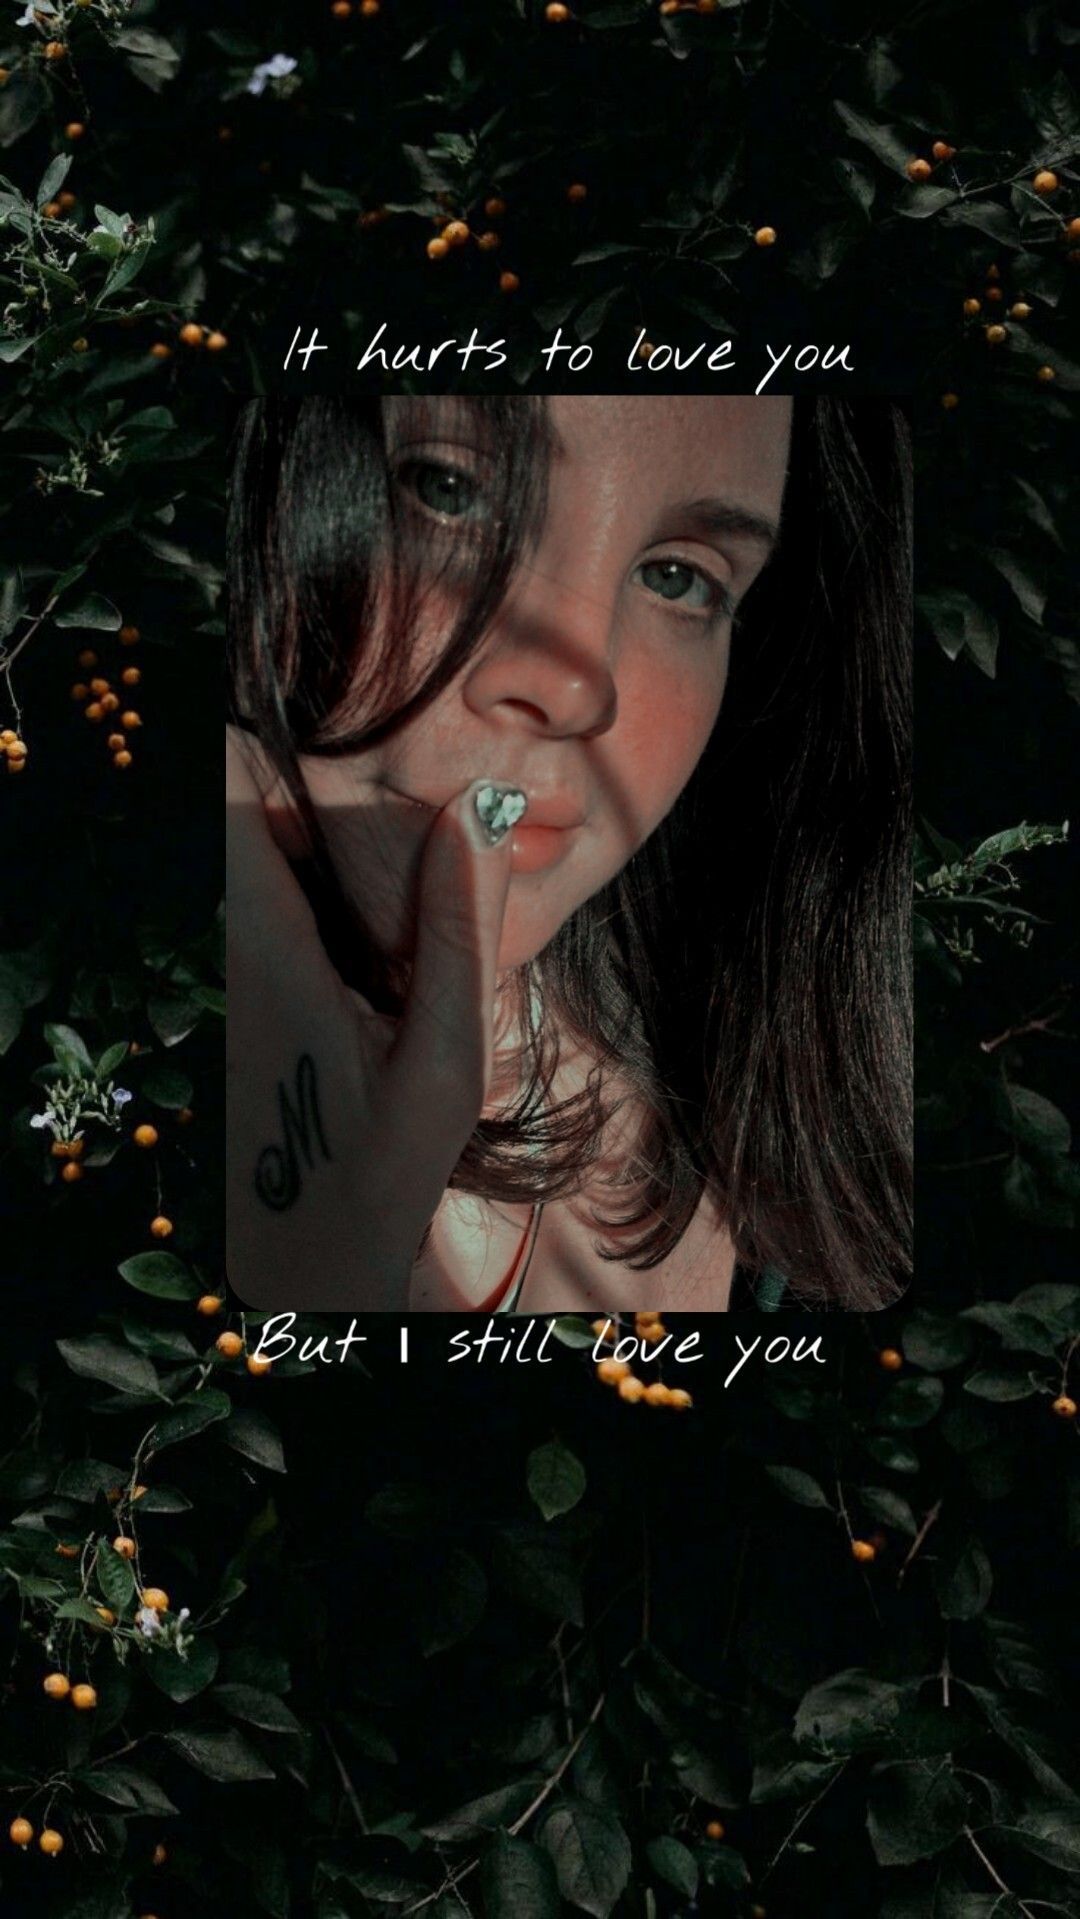 Aesthetic wallpaper of a girl with a quote. - Lana Del Rey